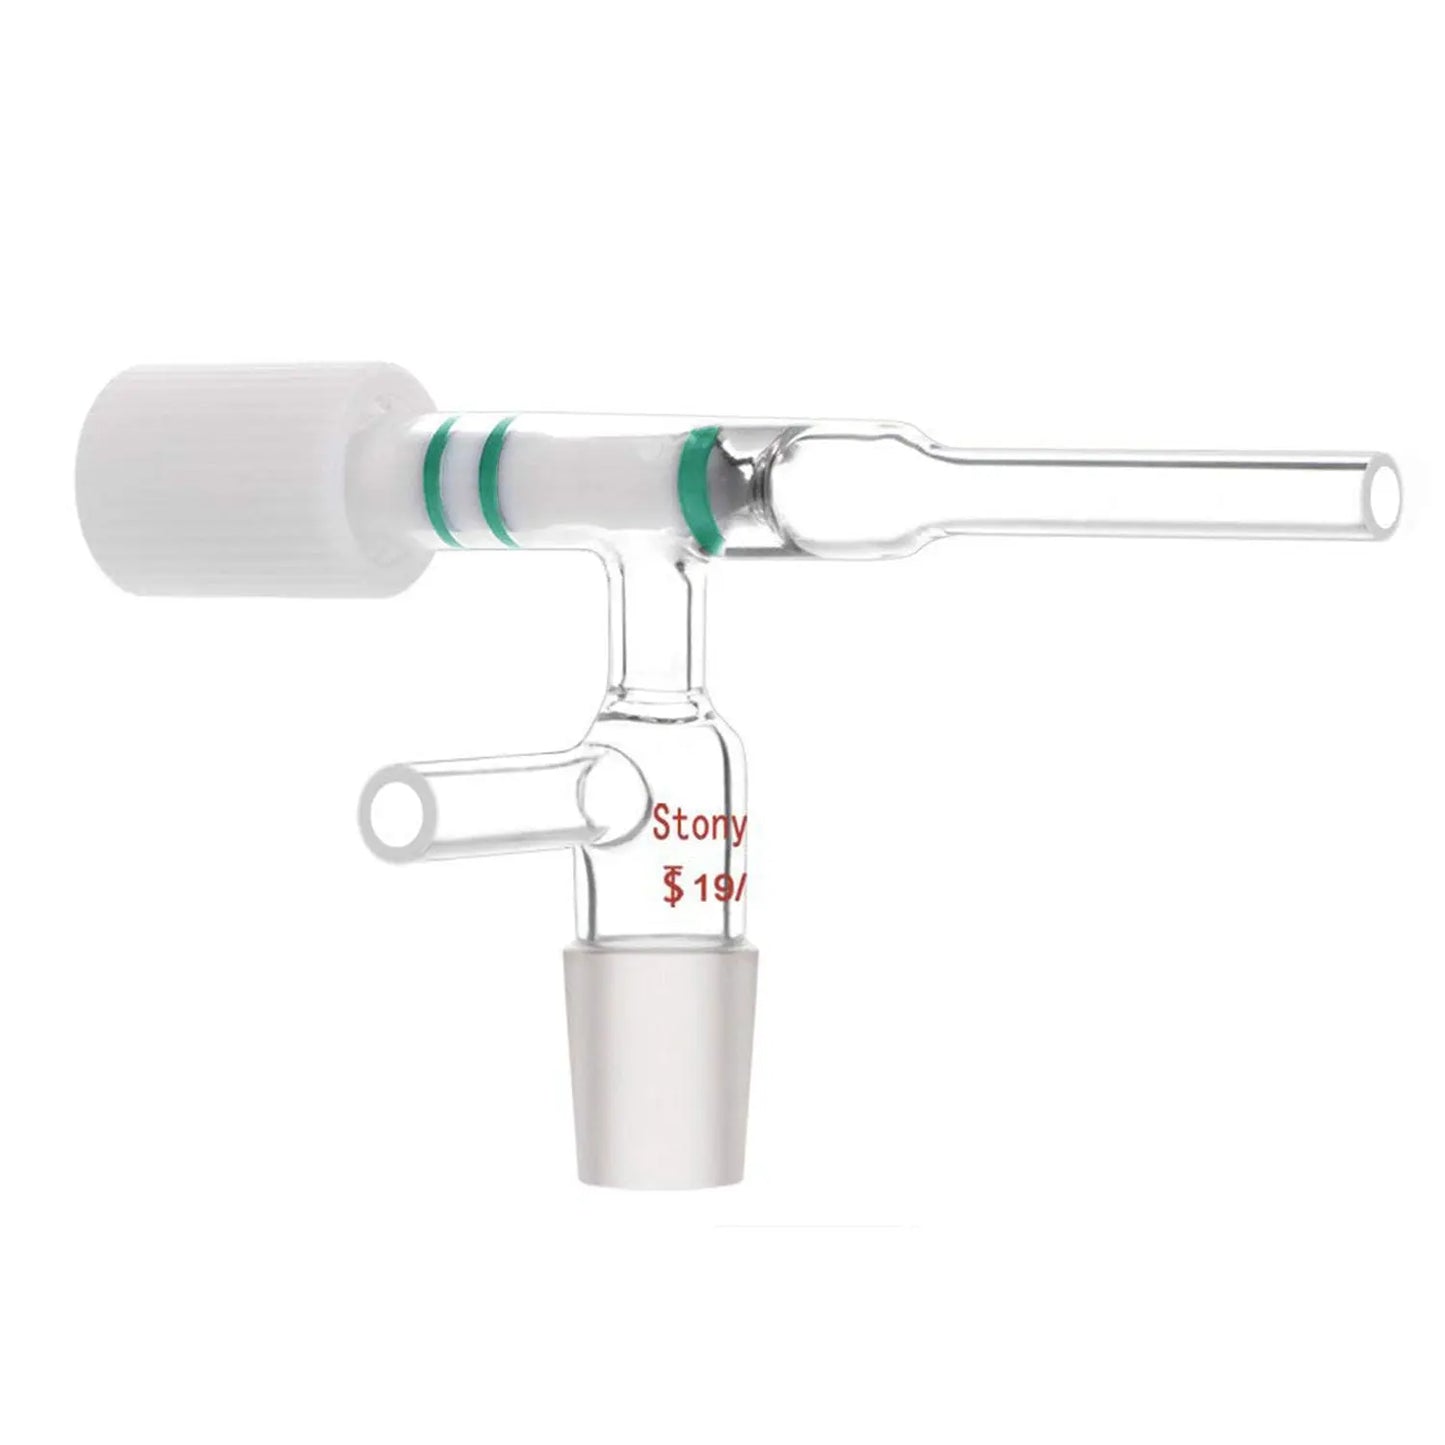 Chromatography Flow Control Adapter Adapters - Flow Control / Vacuum